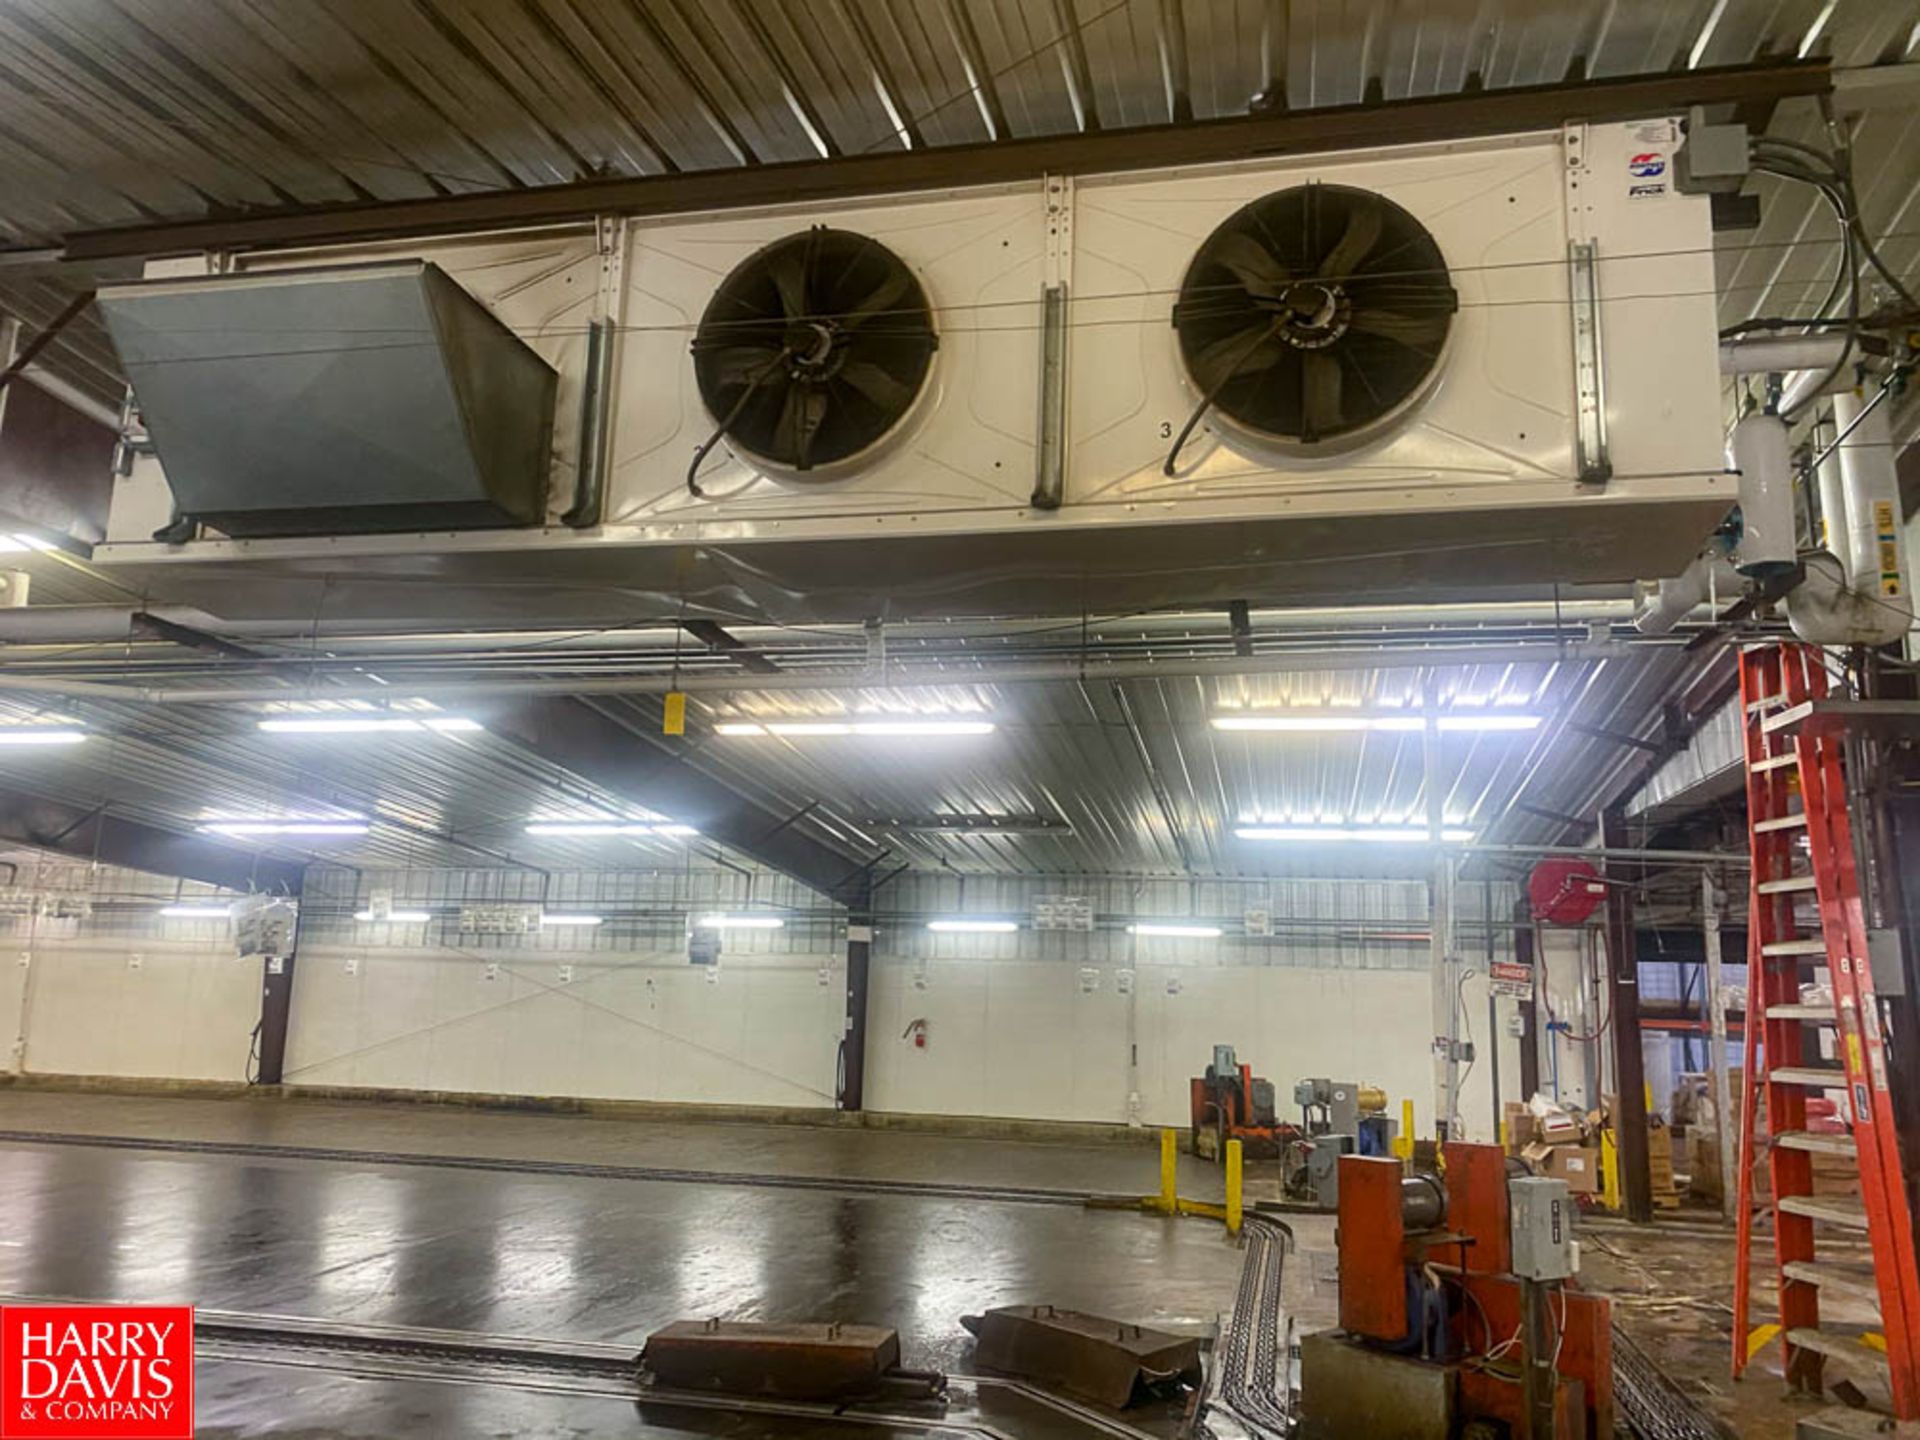 Gunther 3 Fan Chiller Model: 510058 With Vilter Controls And Valves - Rigging Fee: $ 1500 - Image 2 of 2